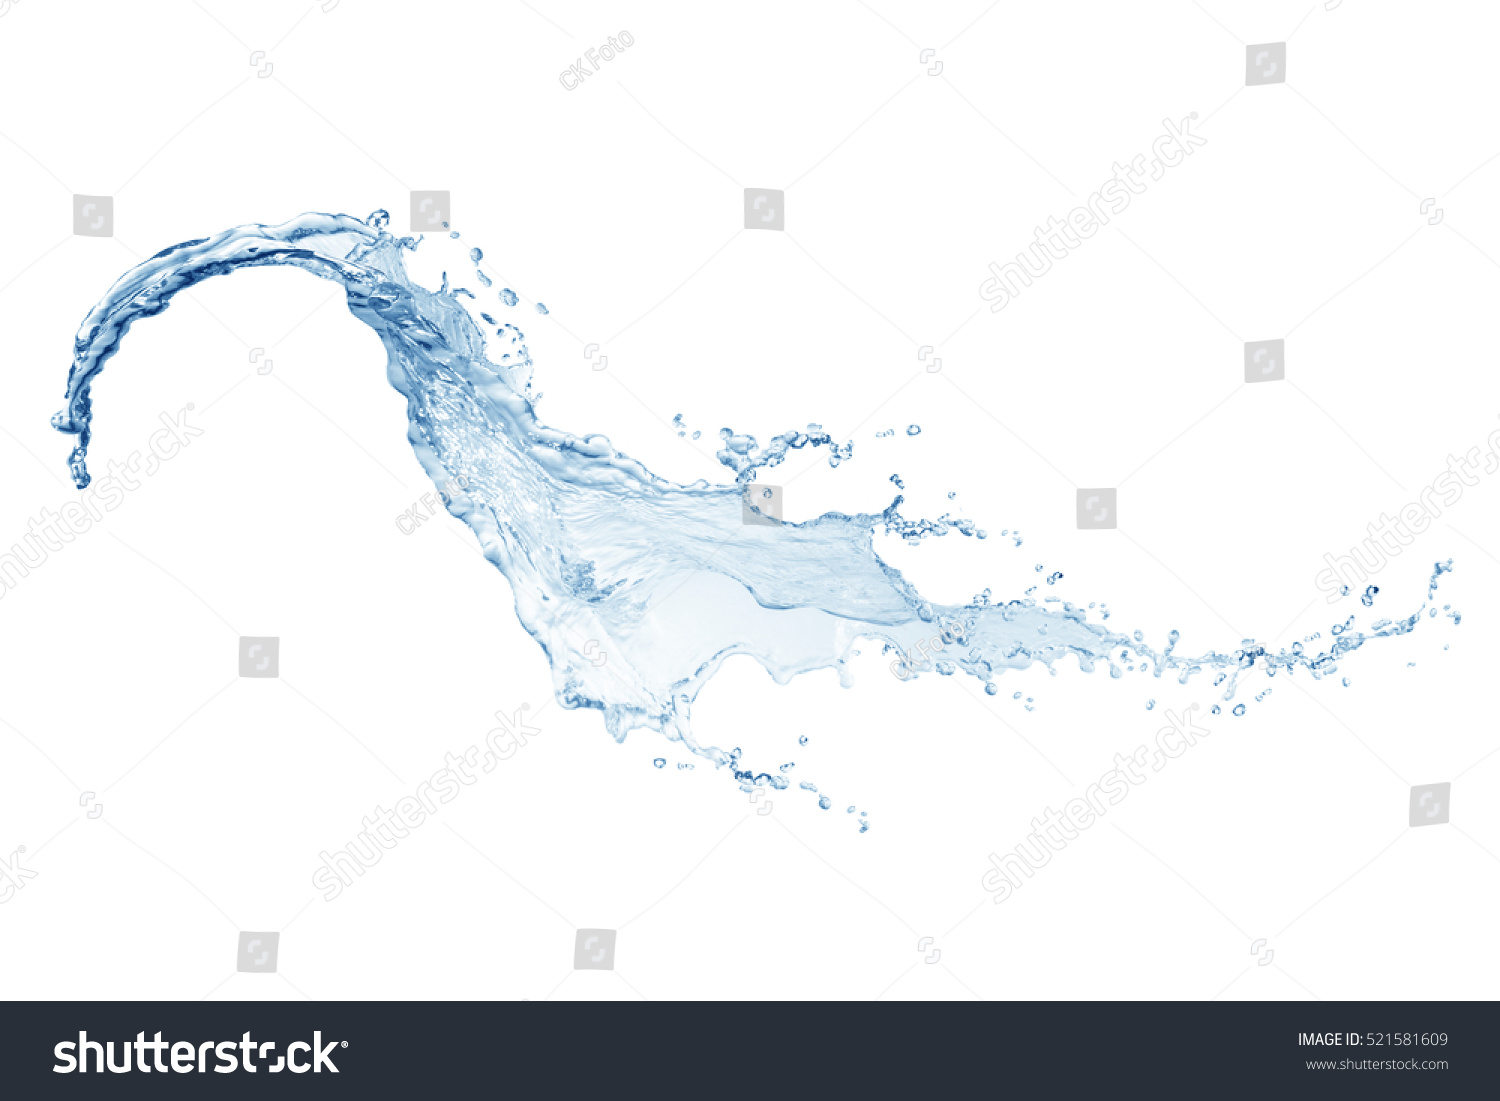 Water,water splash isolated on white background #521581609